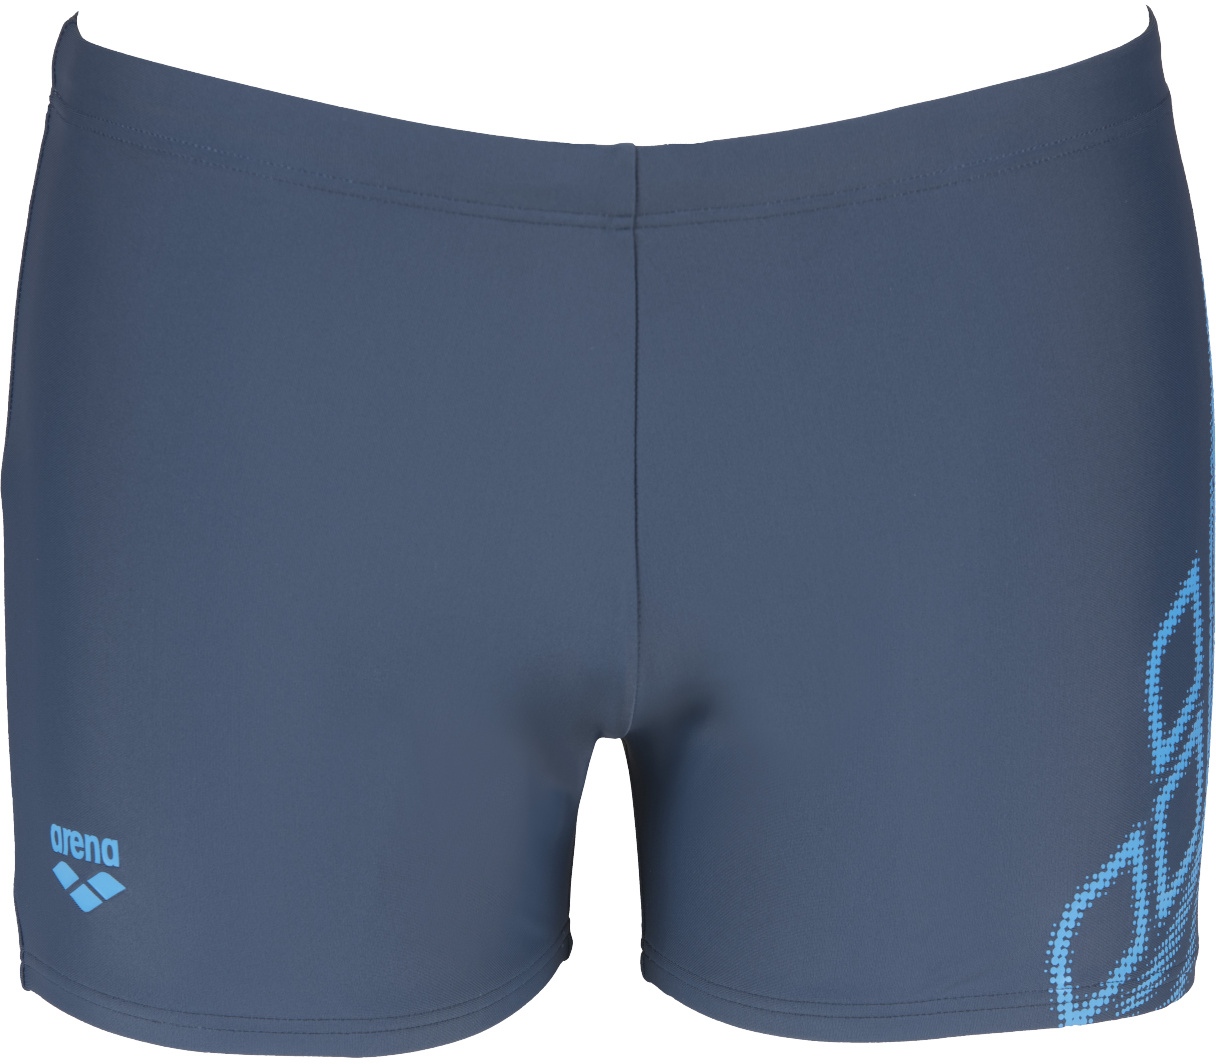 Men’s swim shorts with a front lining